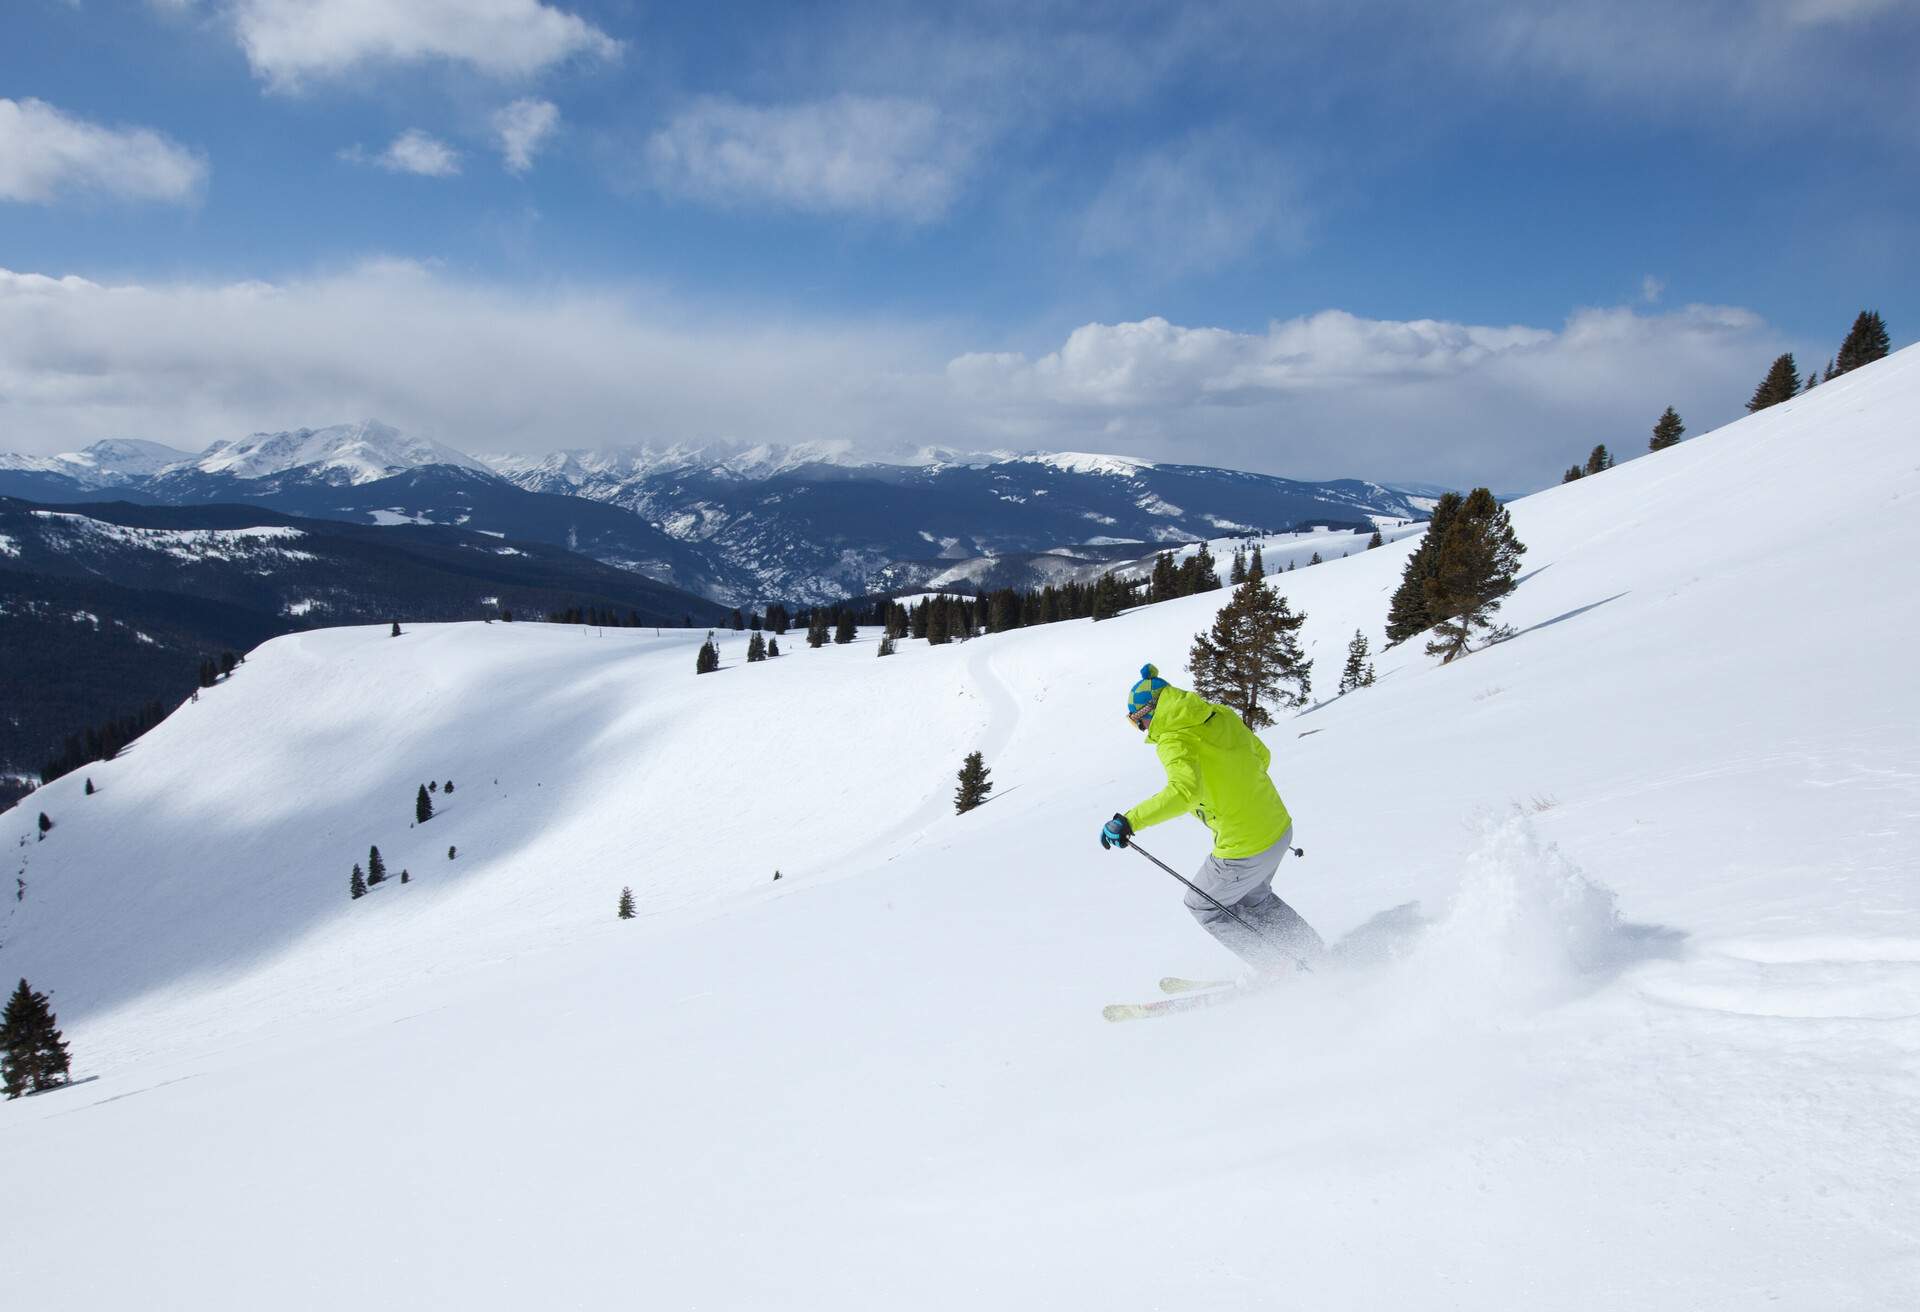 A skier descends a powder snow land of a mountain covered in snow.